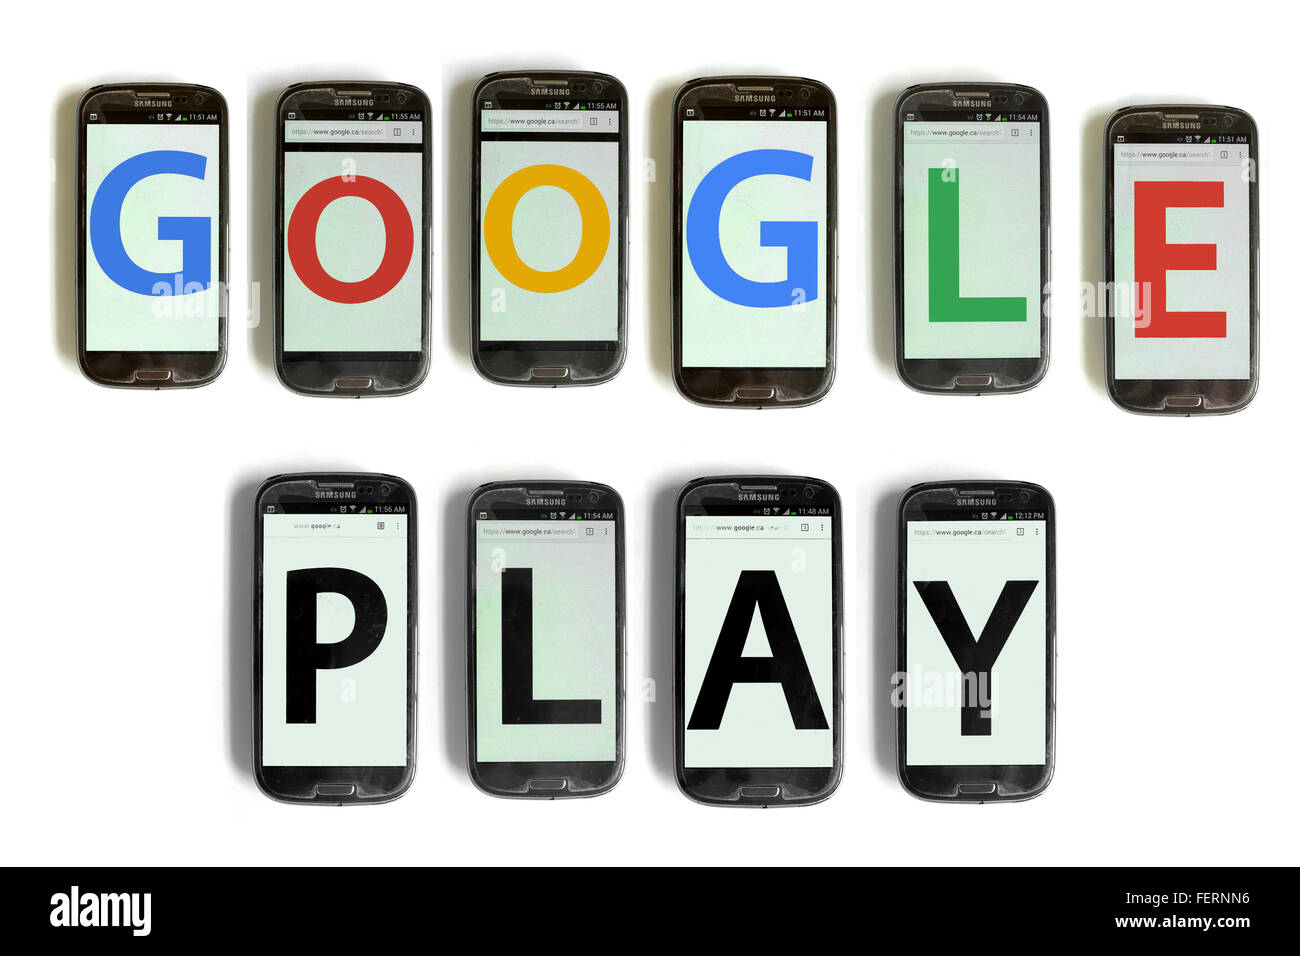 Google Play on the screens of smartphones photographed against a white background. Stock Photo